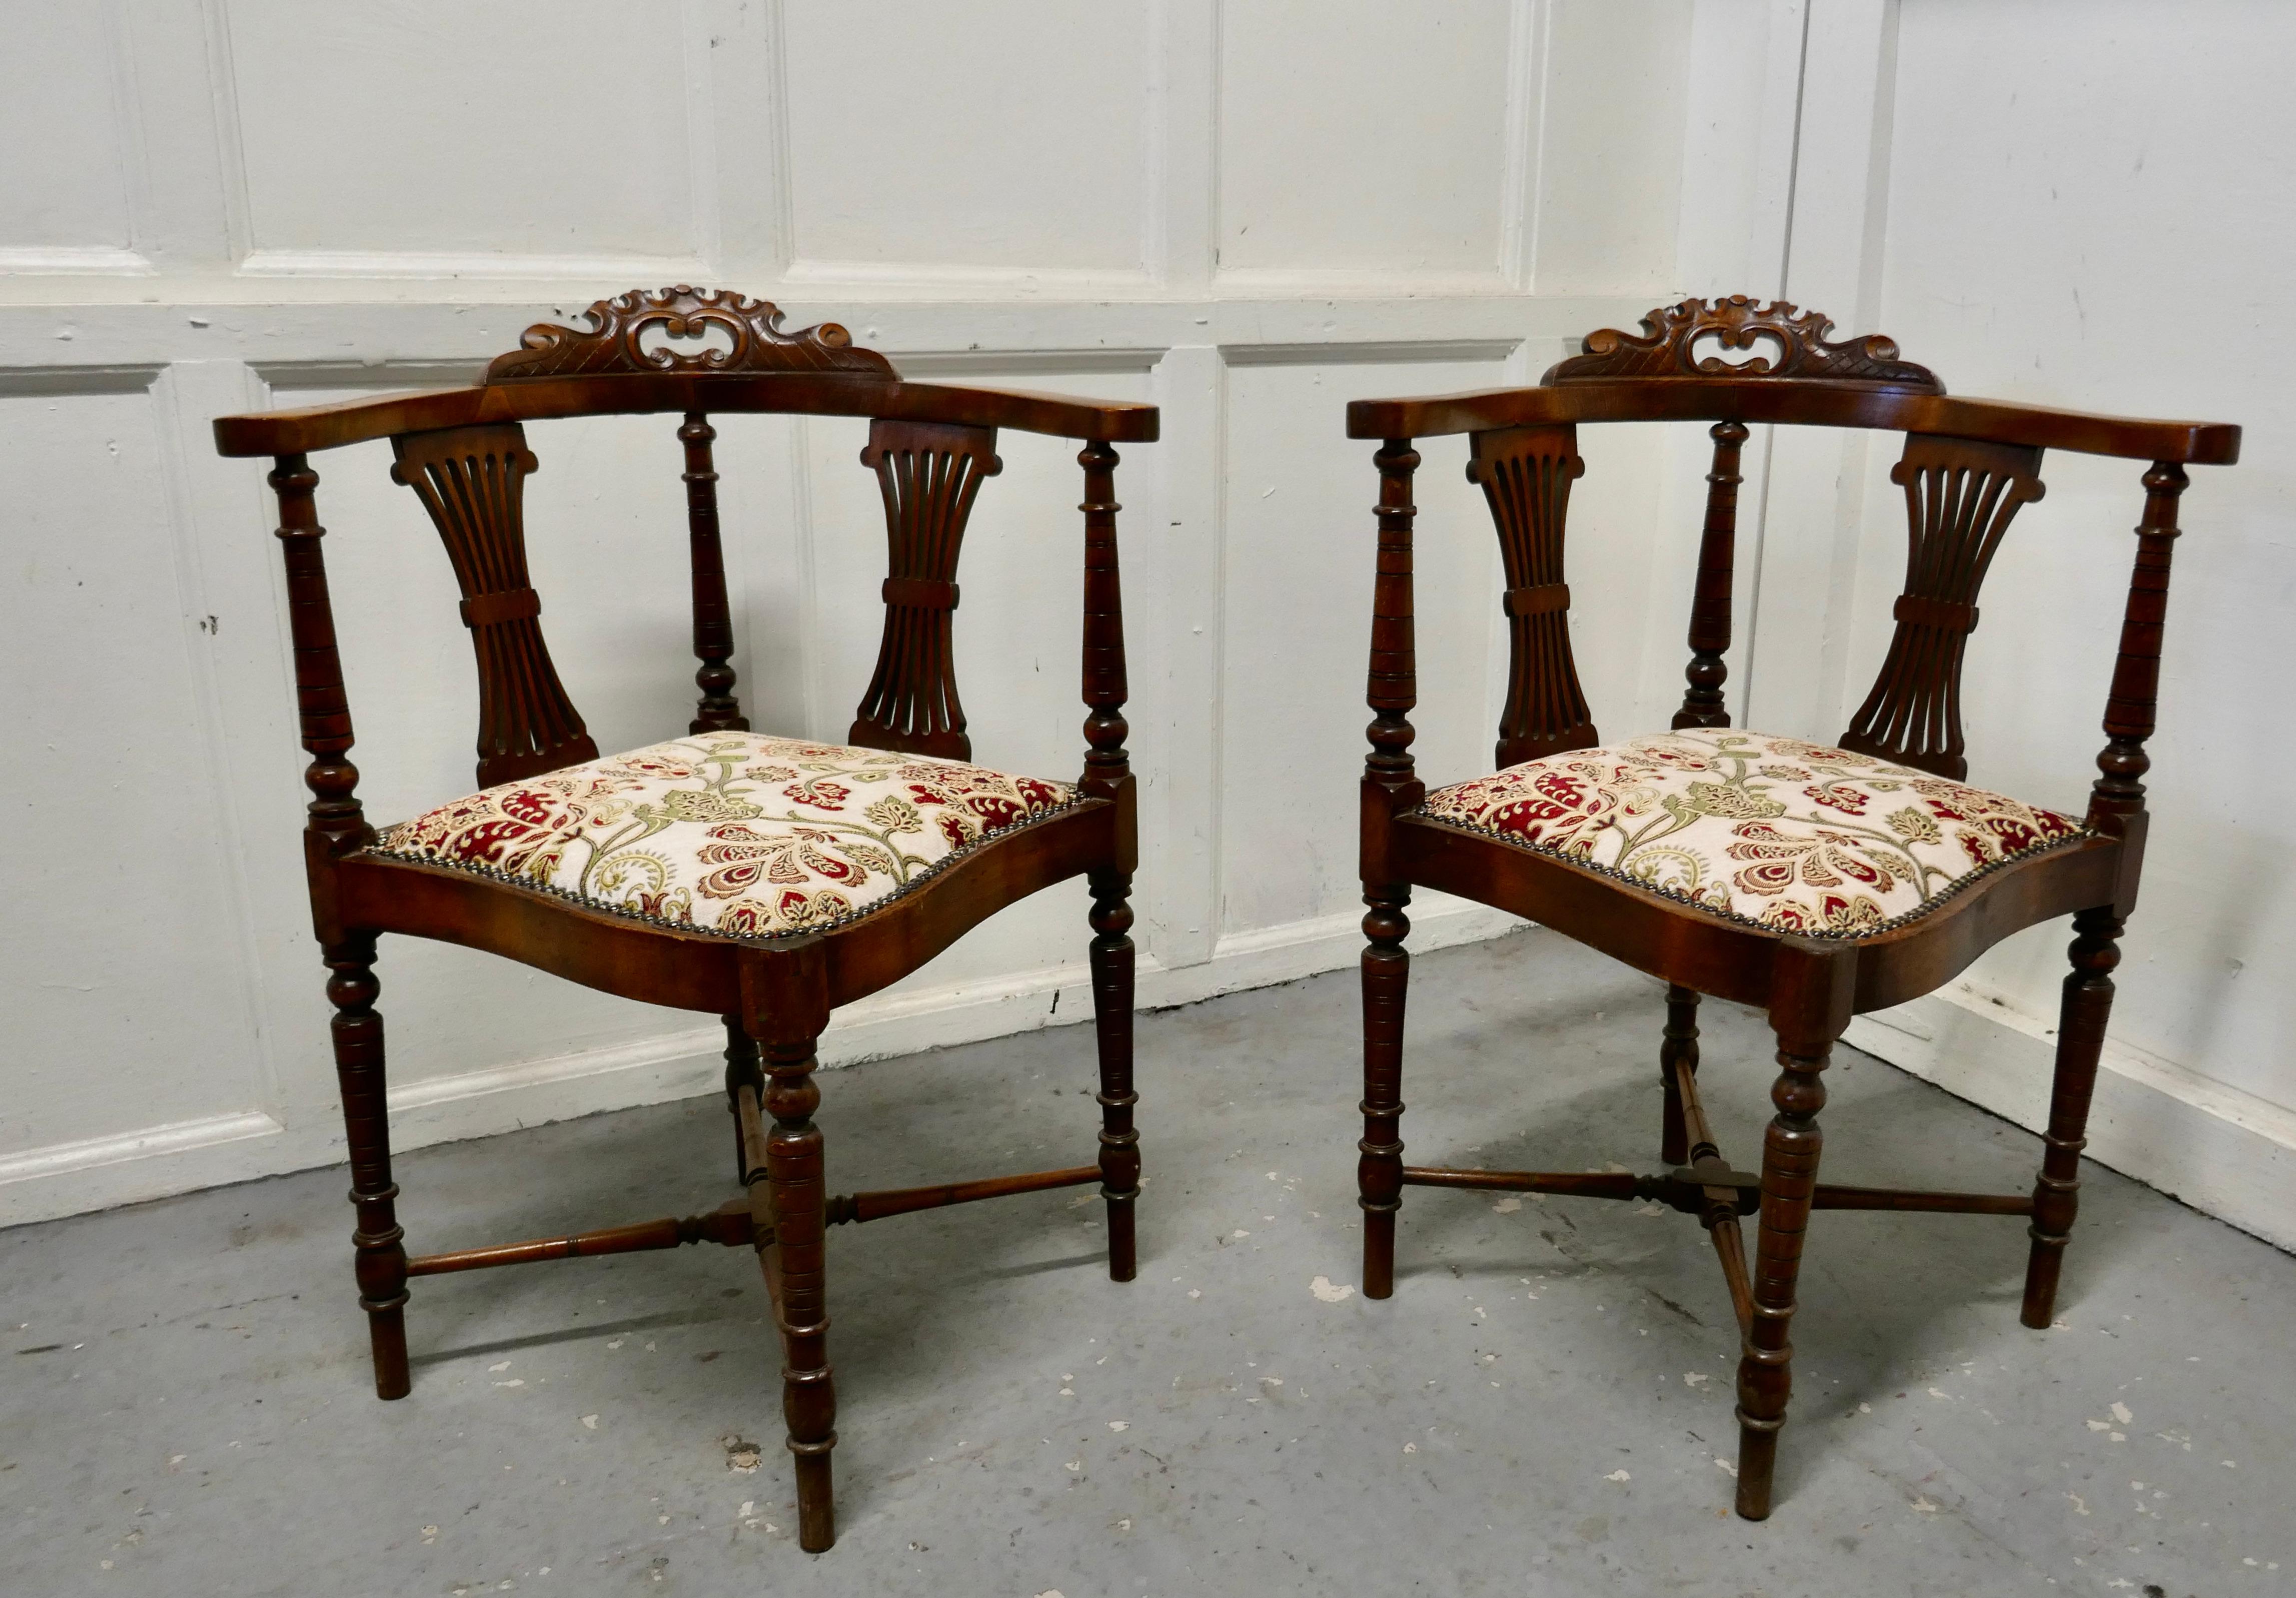 A pair of Edwardian walnut corner arm chairs

A beautiful pair of seats, on the back the chairs have gathered fan splats, framed by turned spindles, set on turned stretchered legs 

The seats have new upholstery in linen with silk embroidery